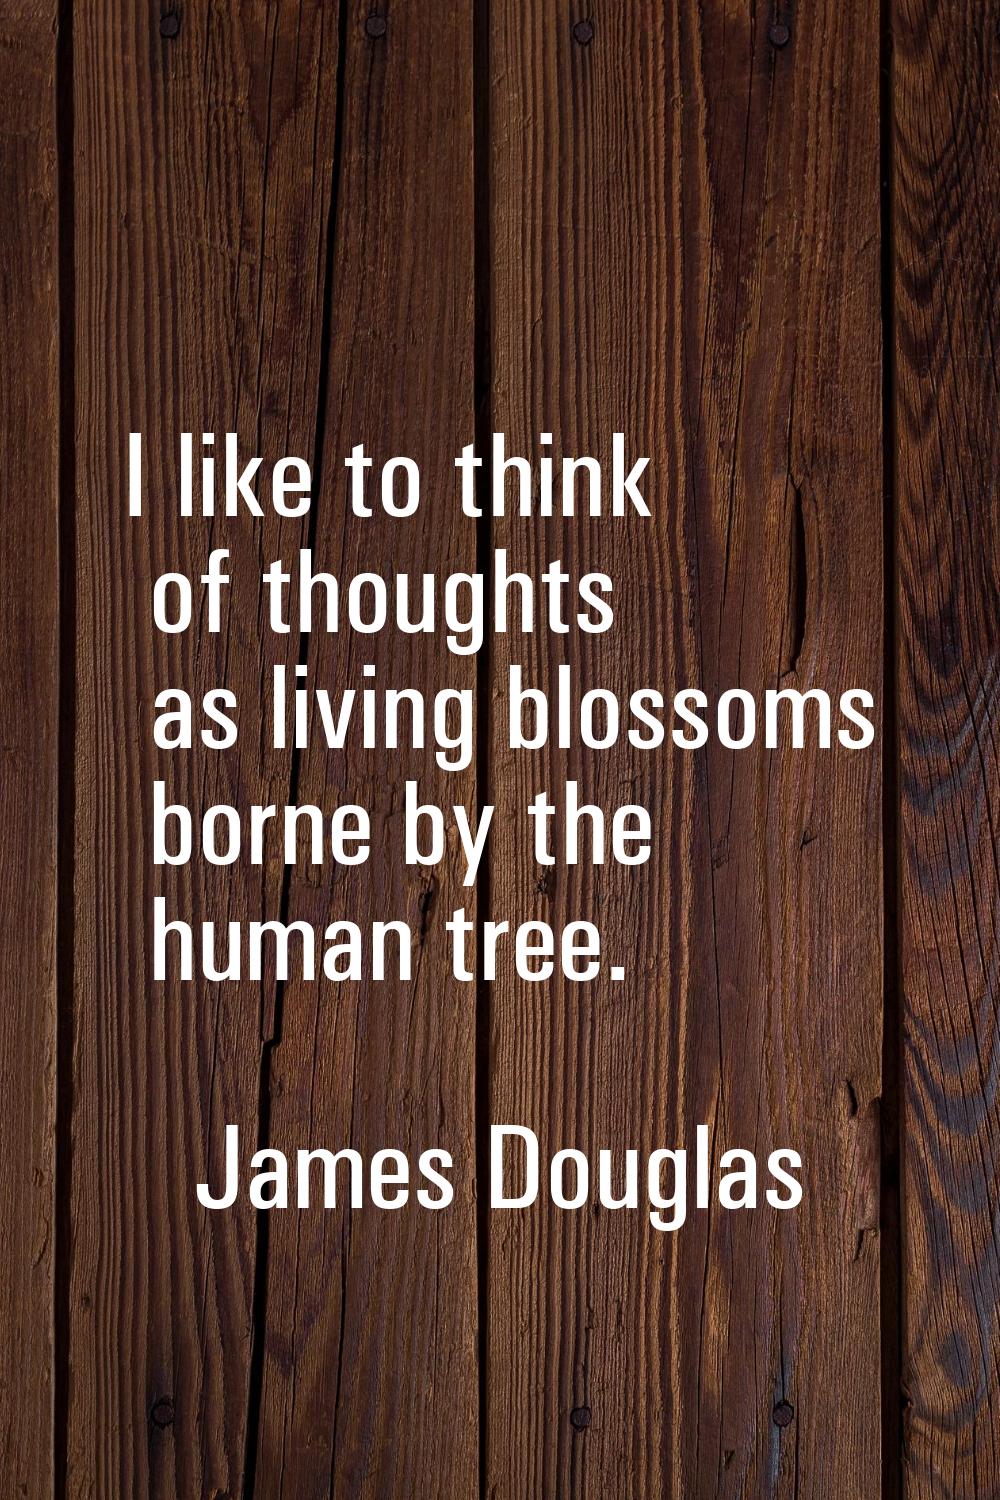 I like to think of thoughts as living blossoms borne by the human tree.